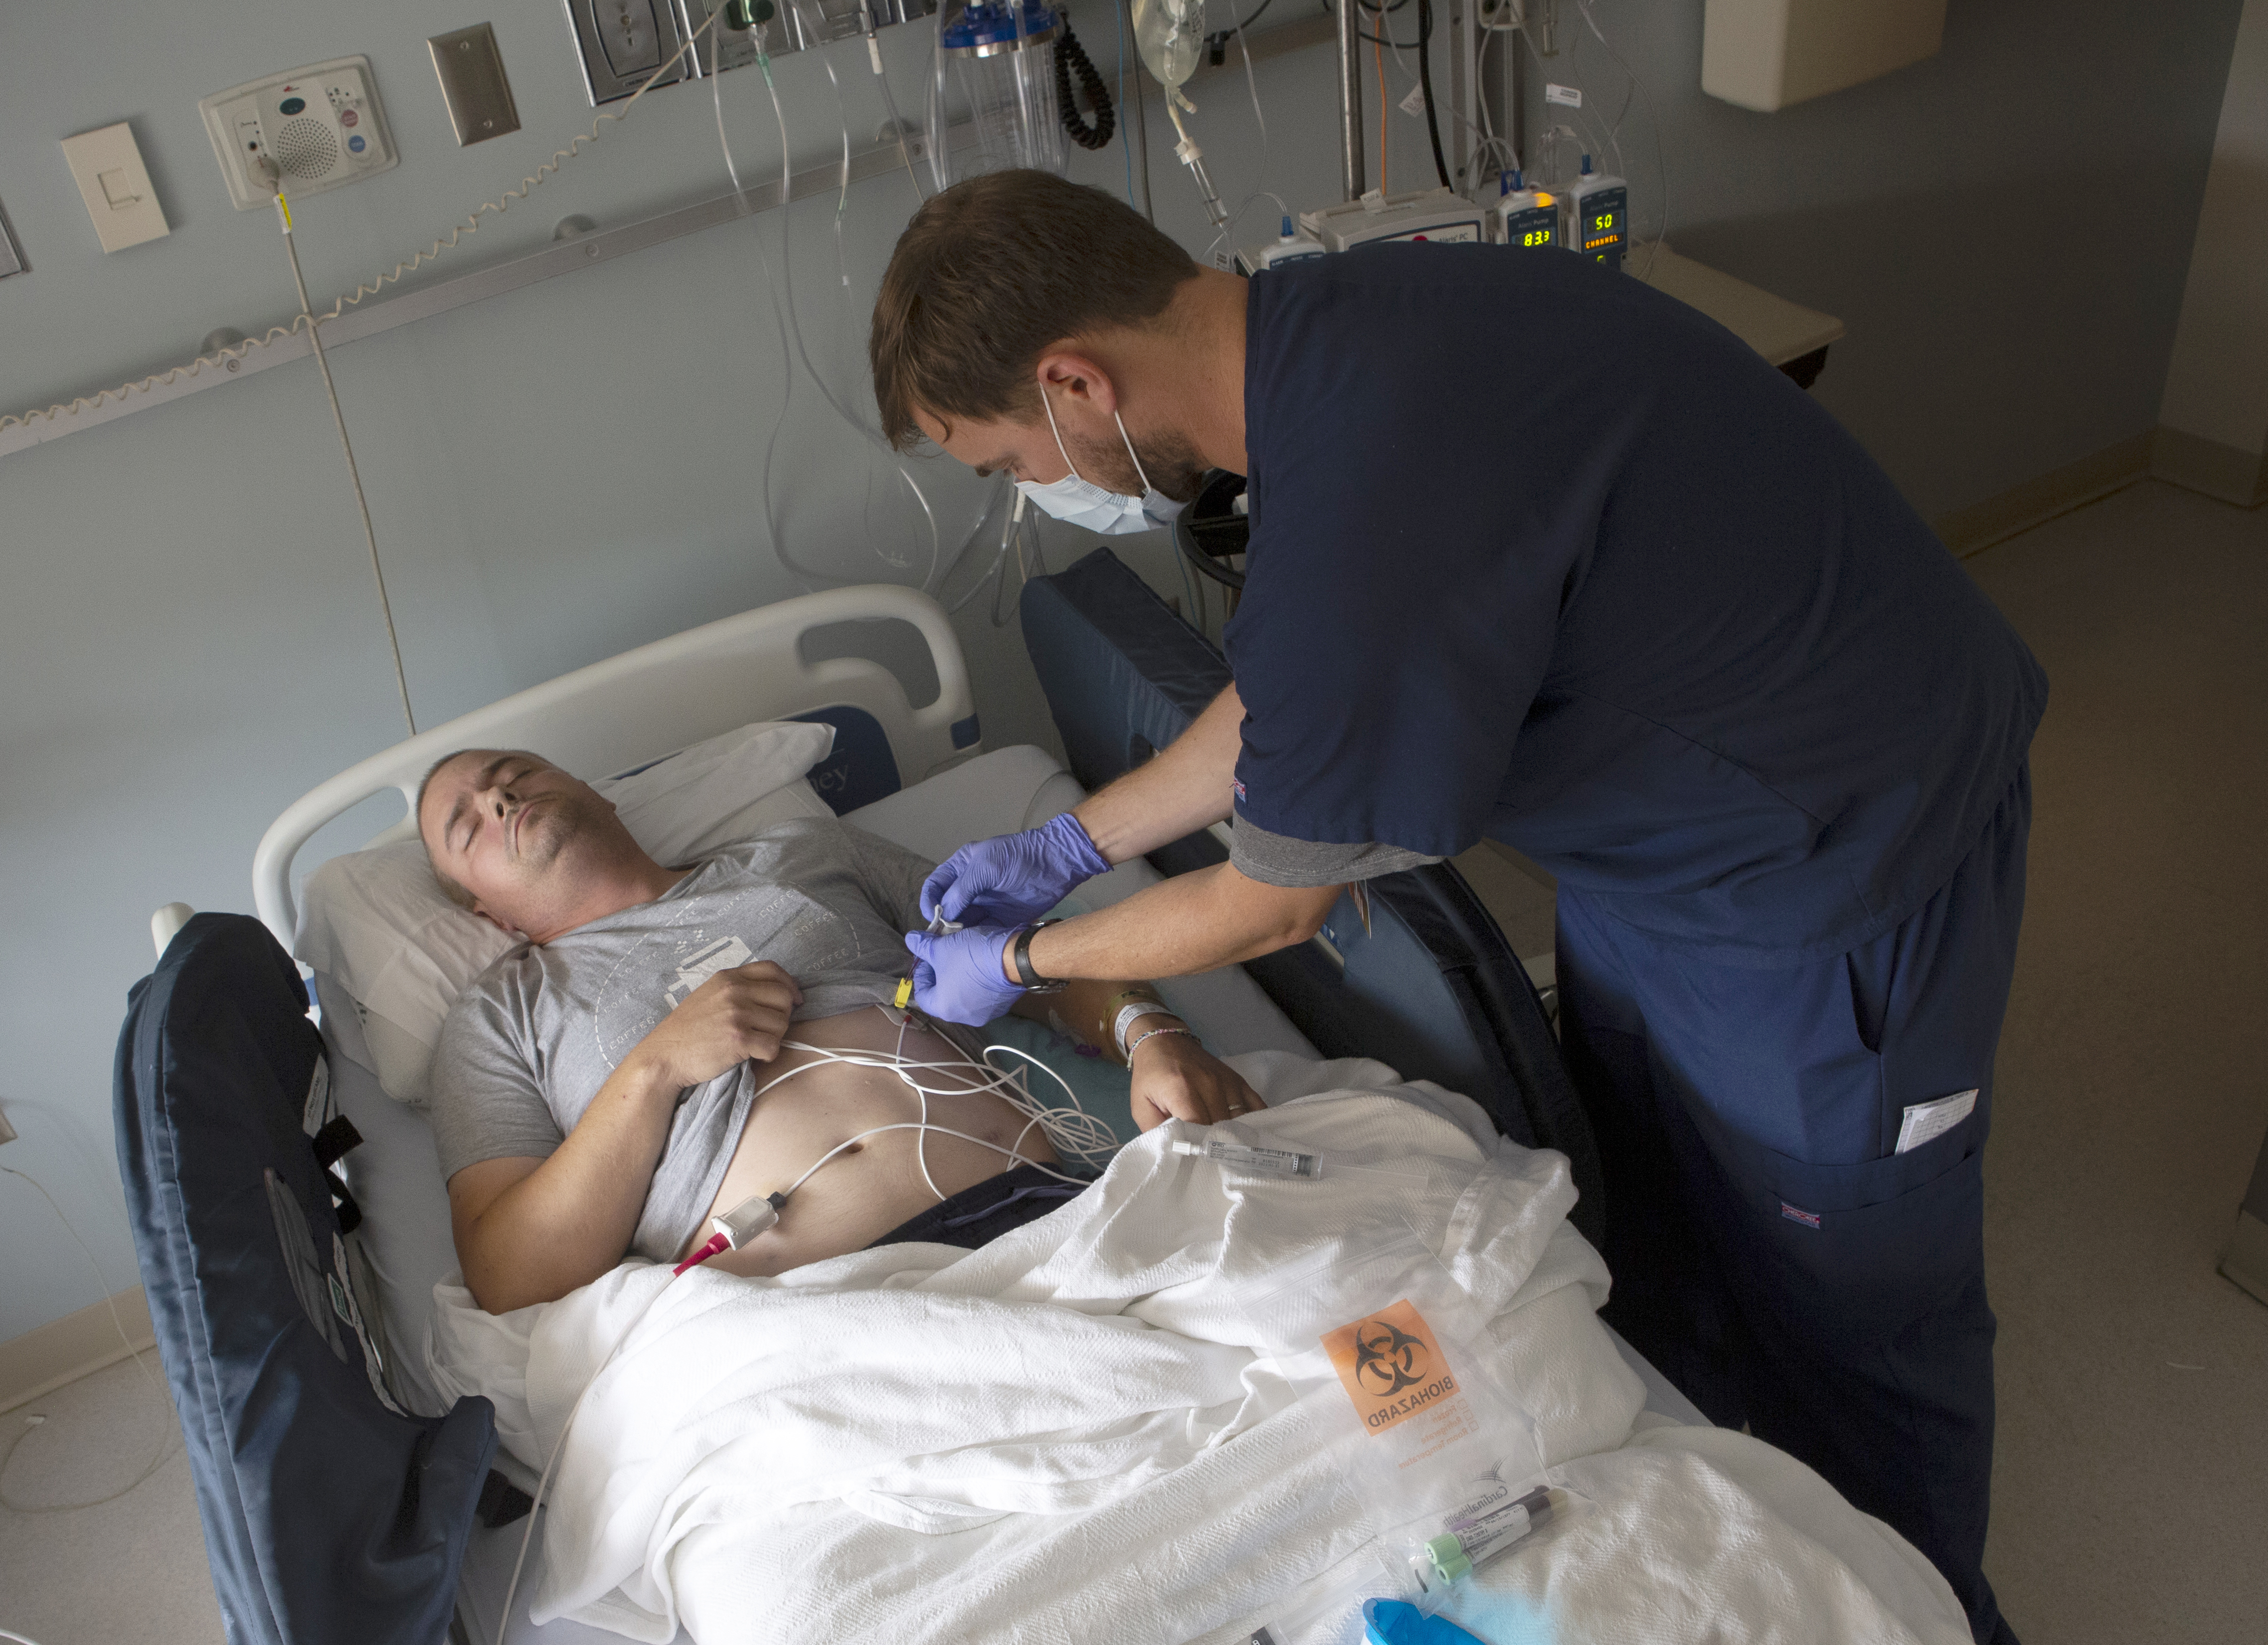 Nathan Savage-Lee, a registered nurse at Penn State Cancer Institute, leans over Tim Card and cleans his central line to prepare him for a blood draw. The line is connected to a port in his abdomen along with other lines. Tim is lying in a hospital bed with his eyes closed, holding his T-shirt up. Nathan is wearing a surgical mask and blue scrubs.